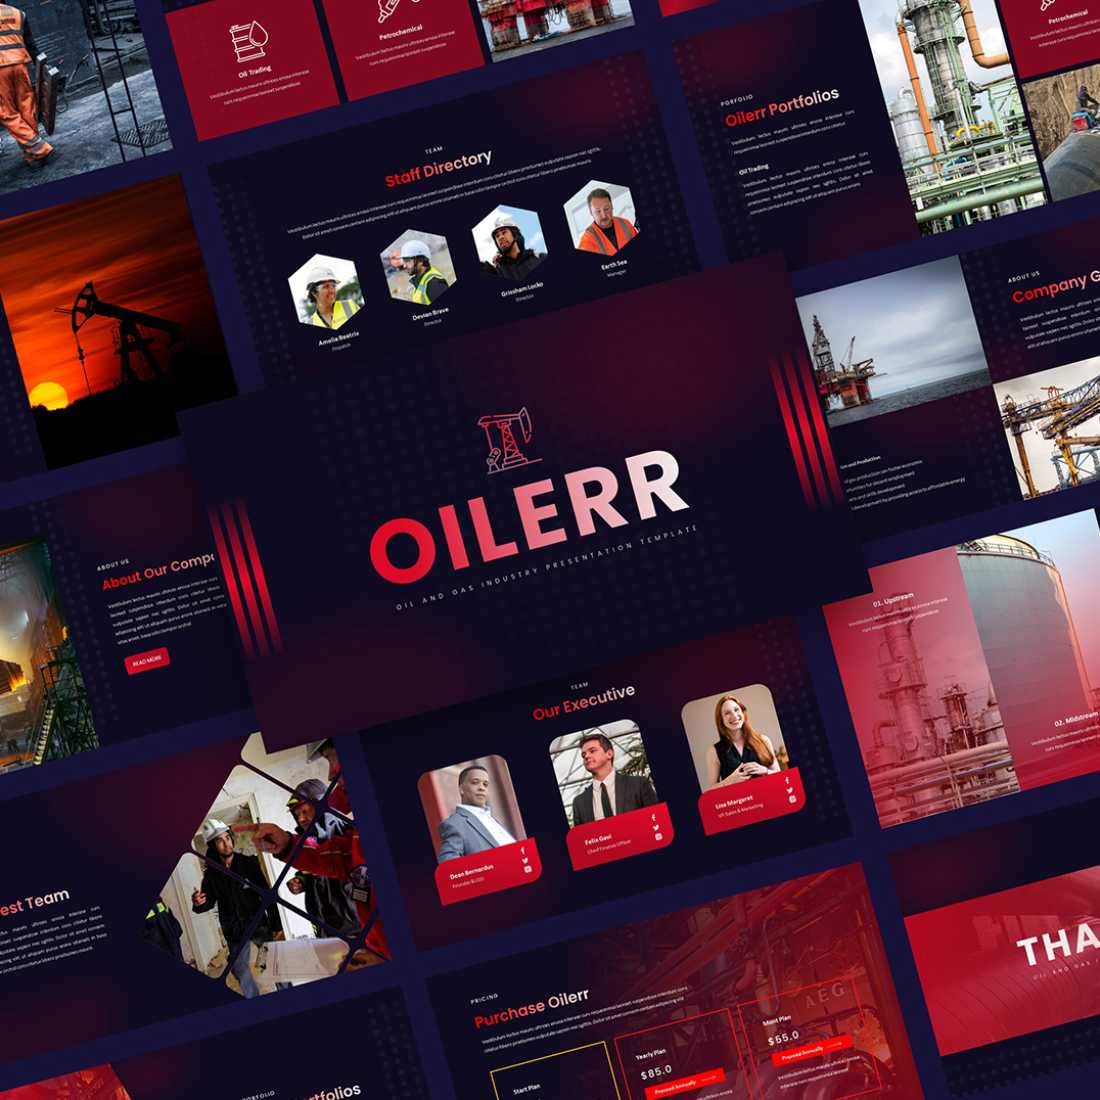 Oilerr-Oil and Gas Industry Presentation Google Slides Template preview image.